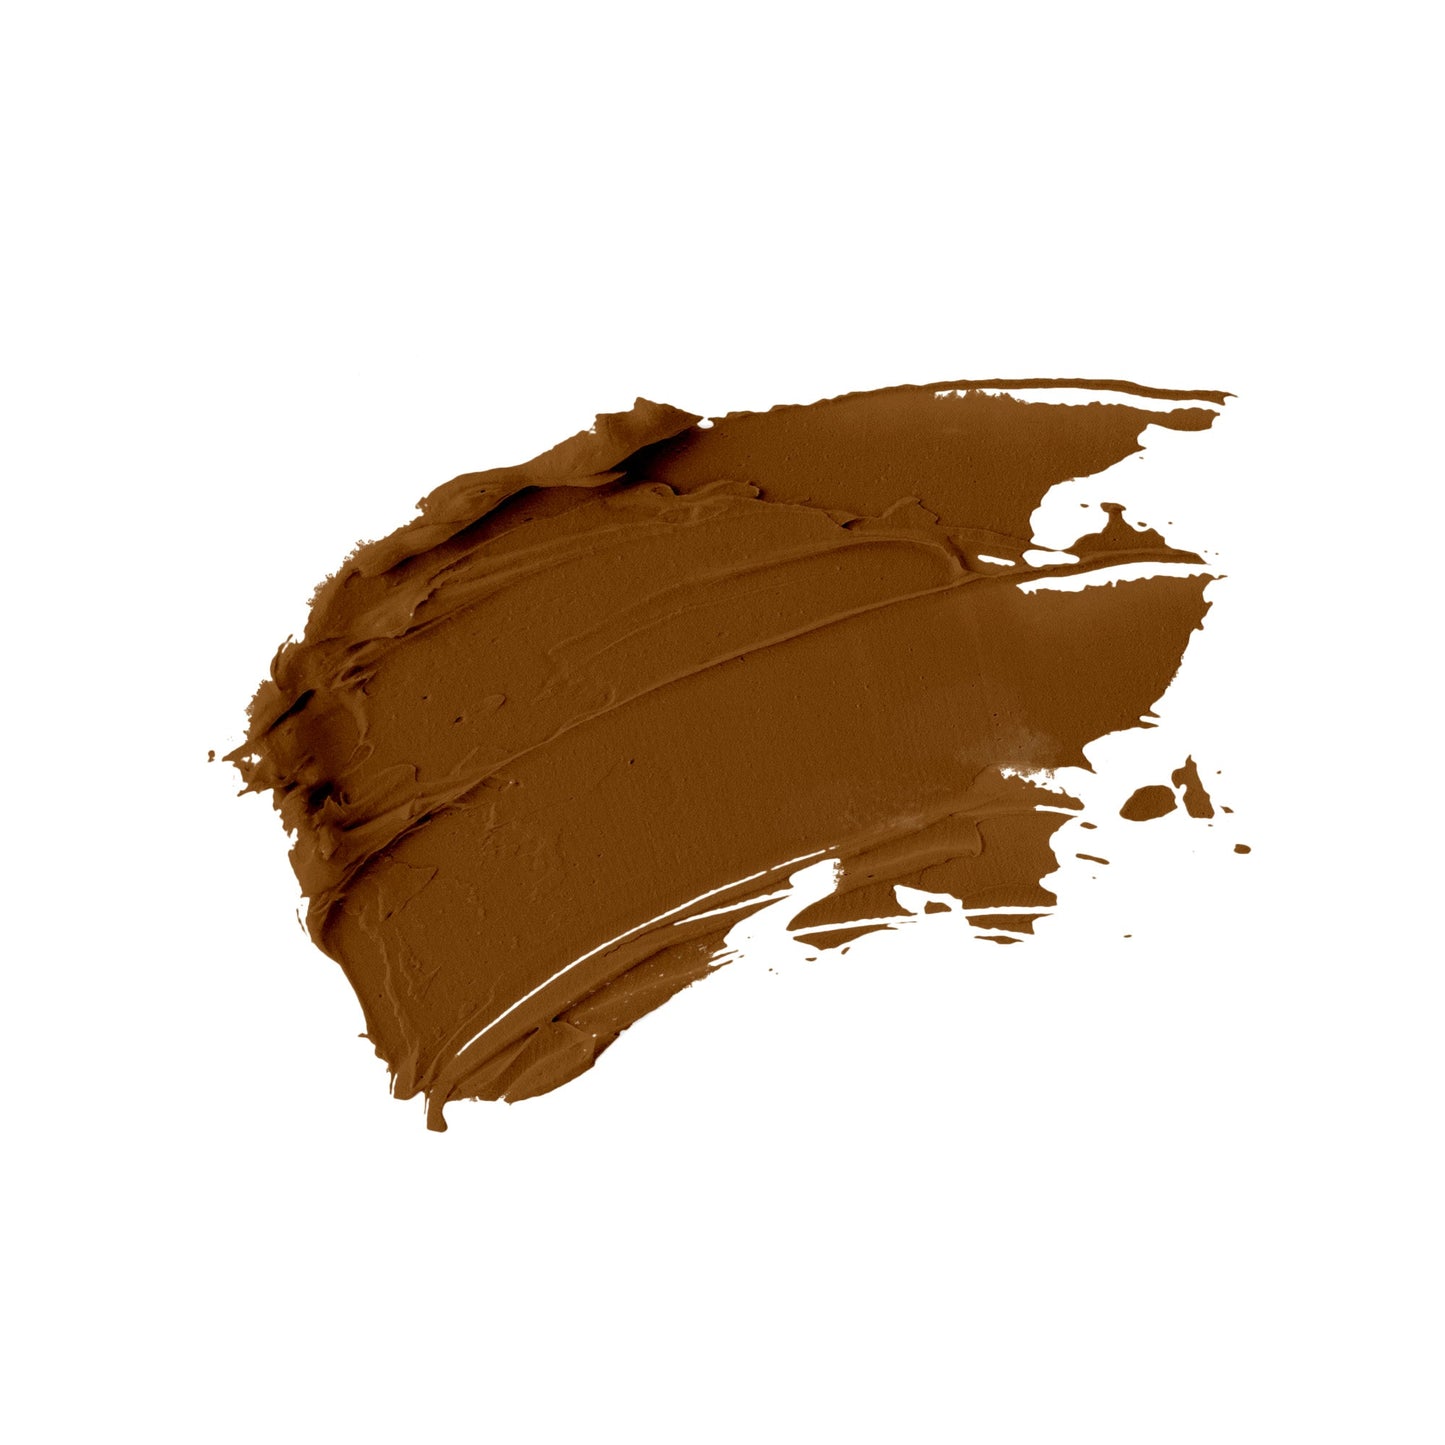 Swatch of amber color tone of an oil free natural non-toxic liquid foundation